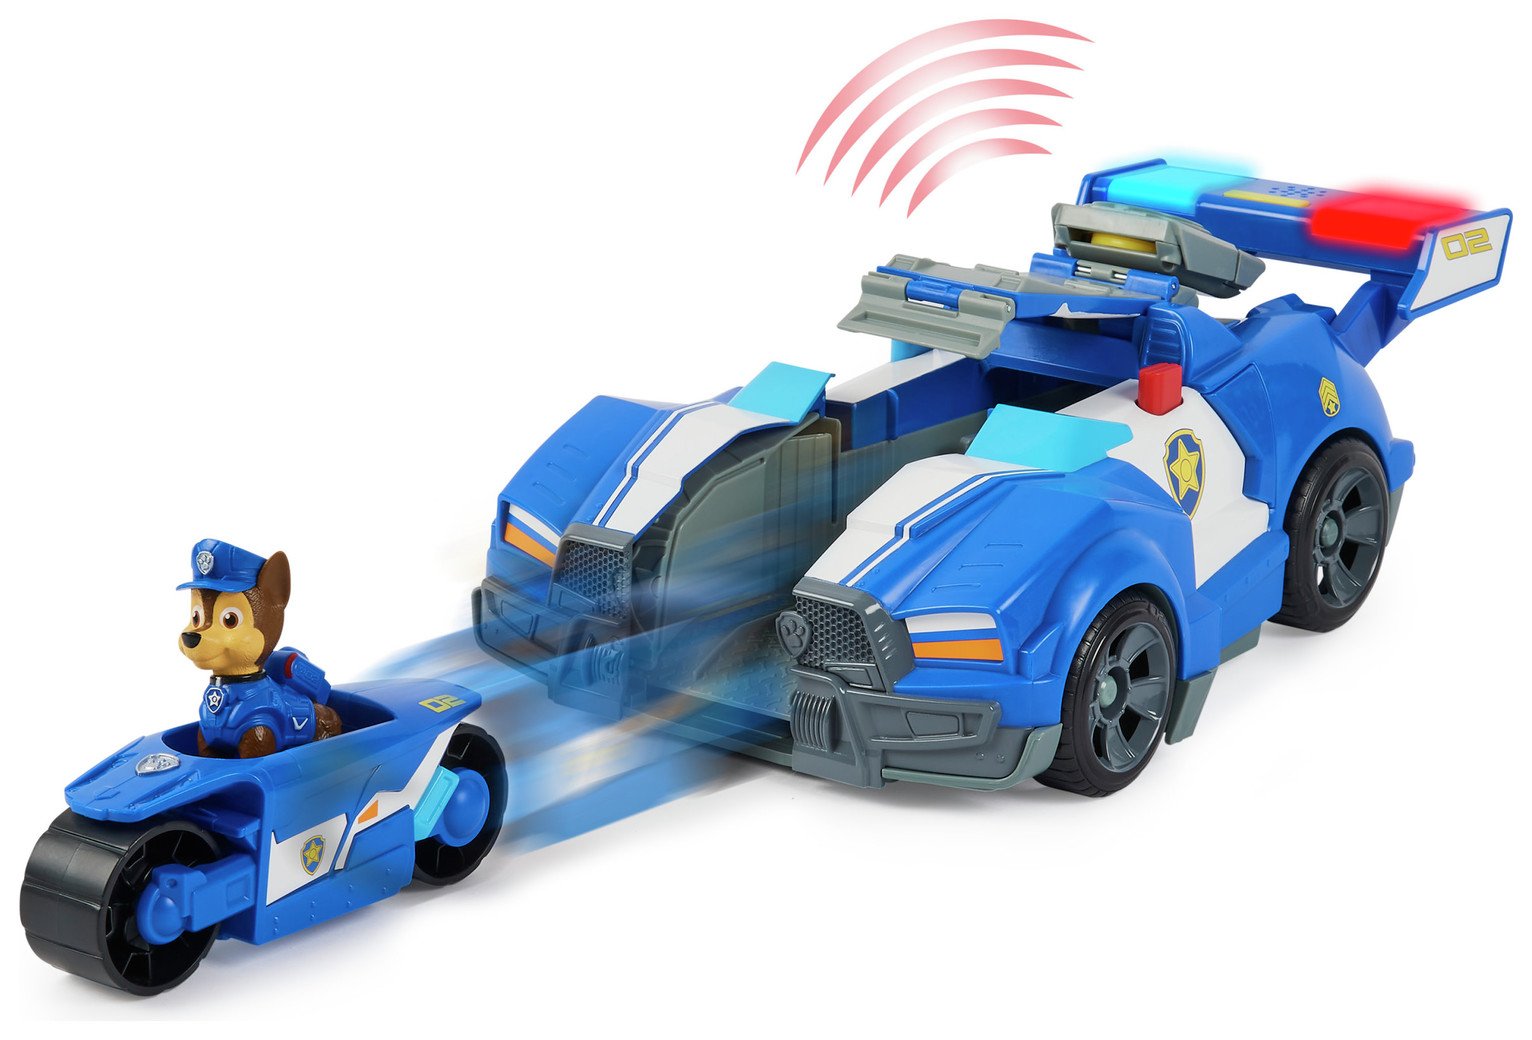 PAW Patrol Movie Chase Transforming City Cruiser Car review